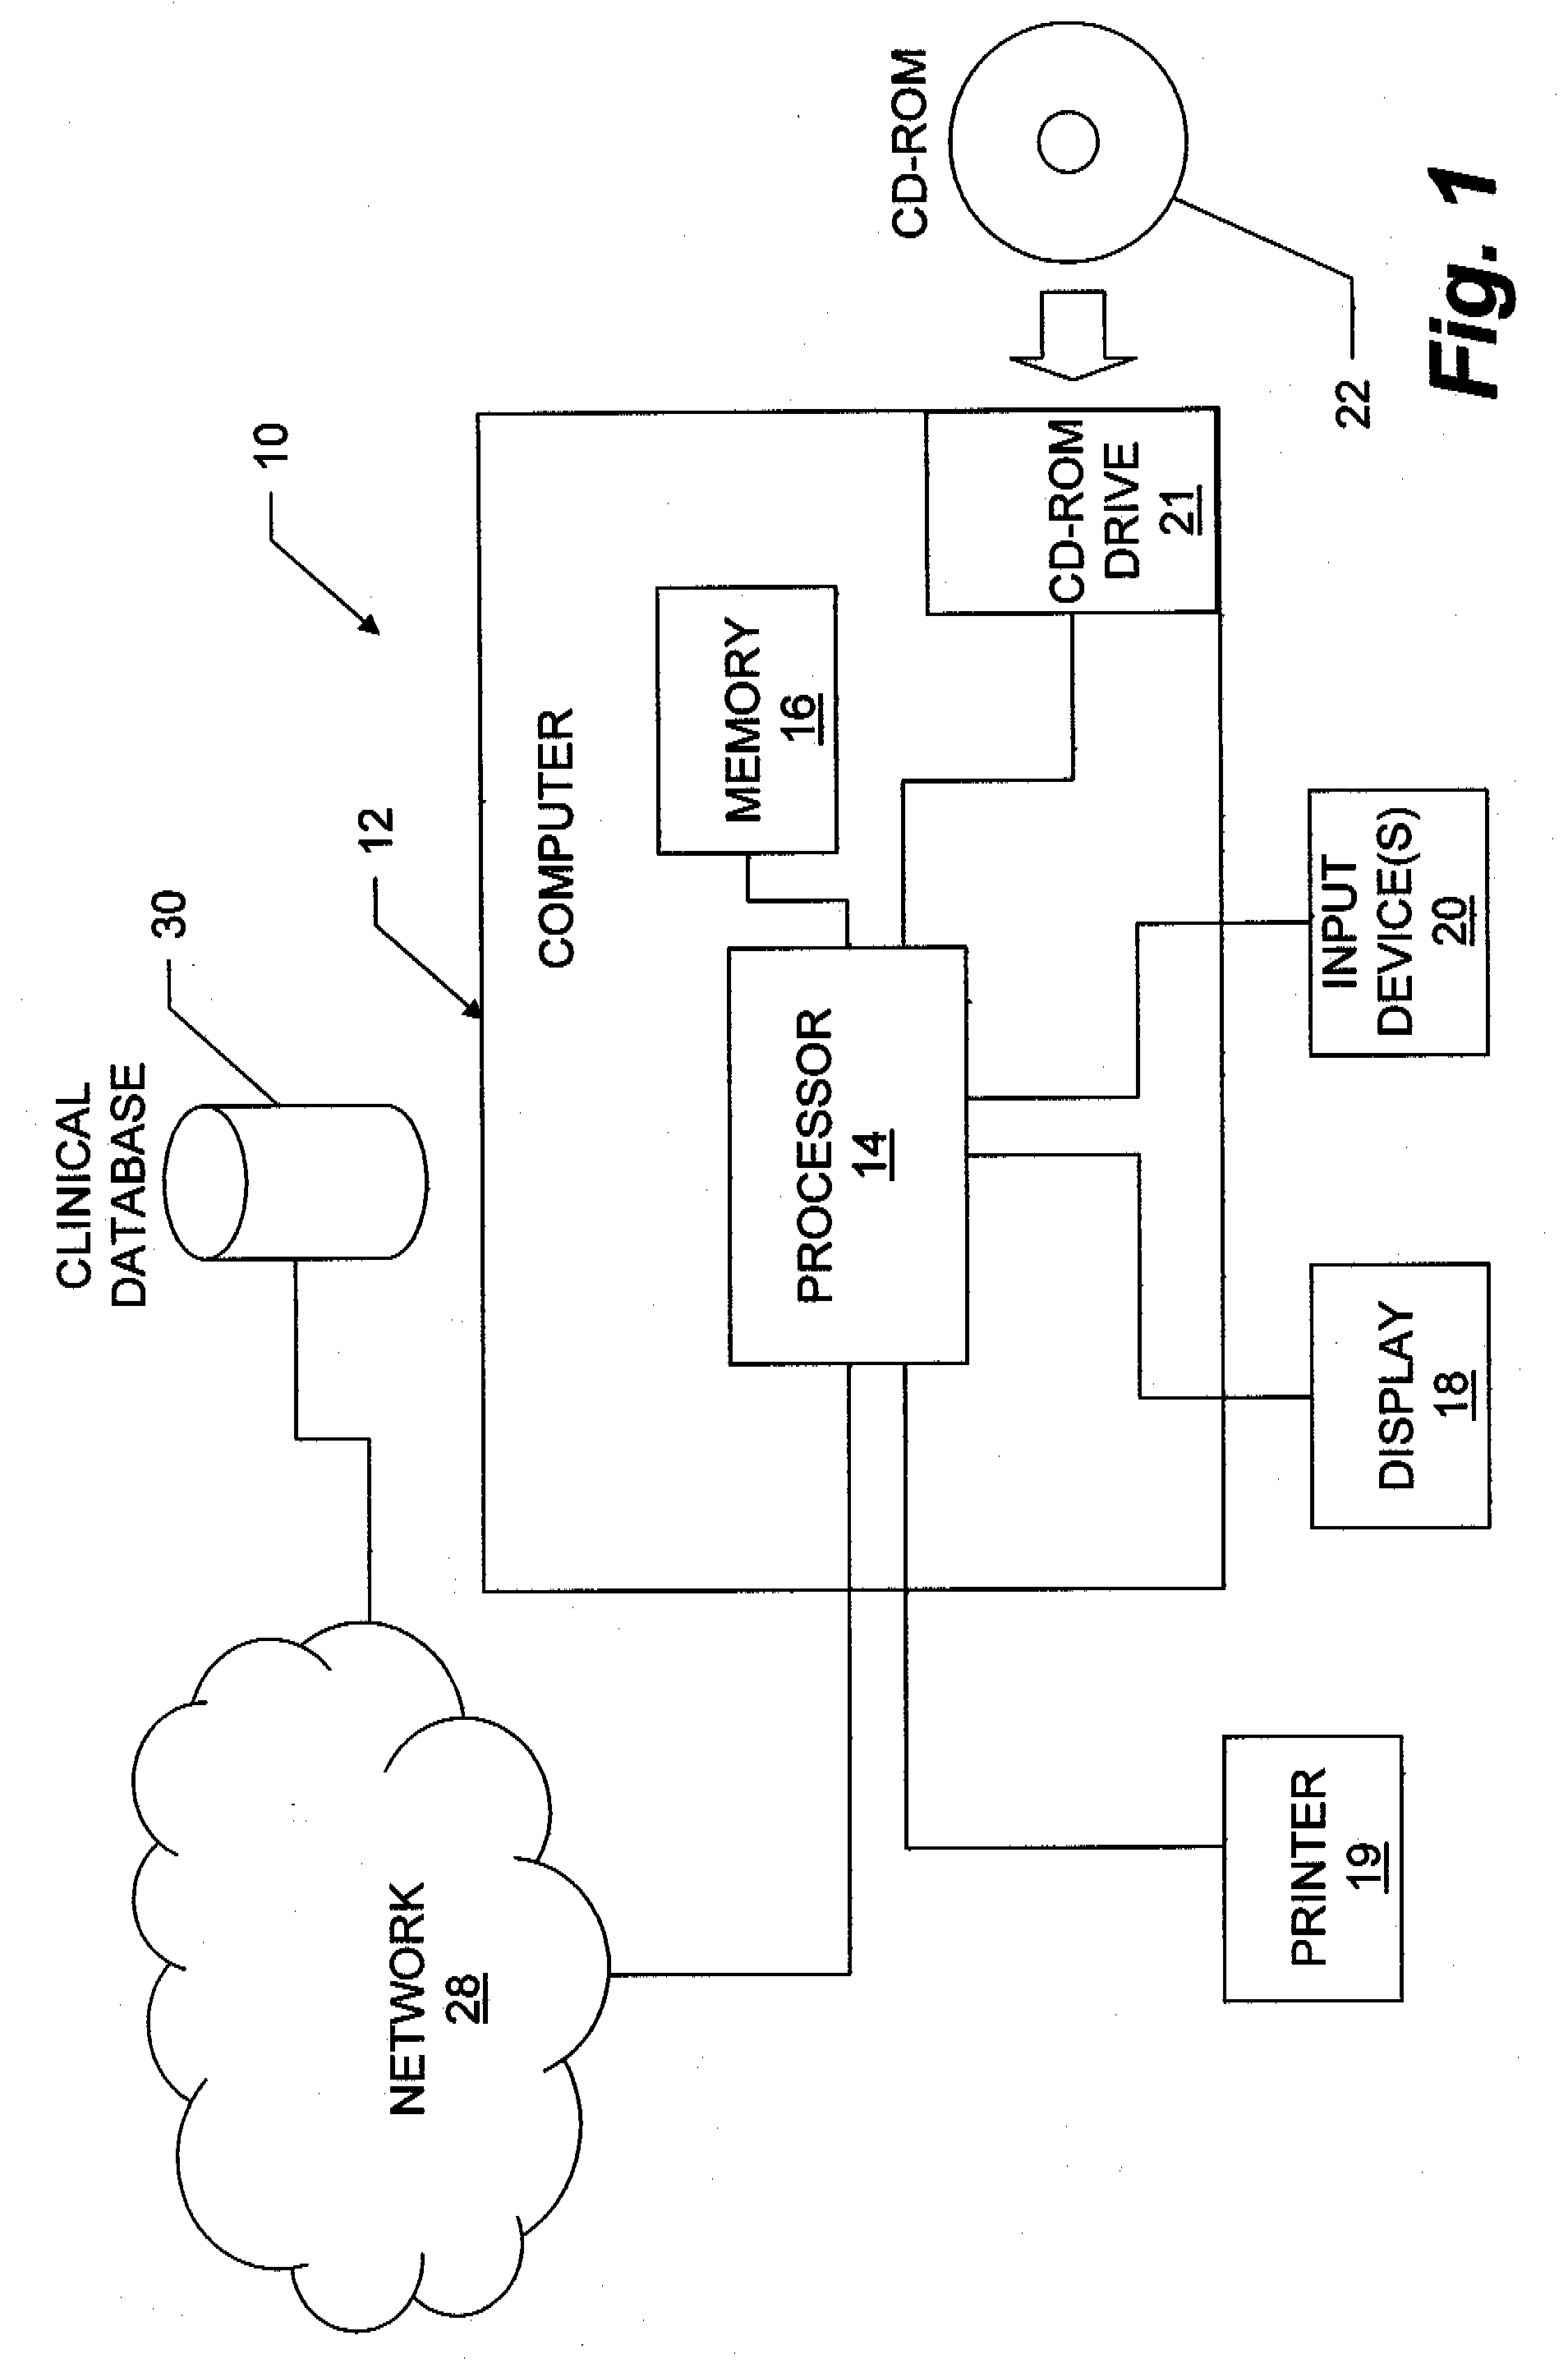 Methods and apparatus to generate rules for clinical lab results